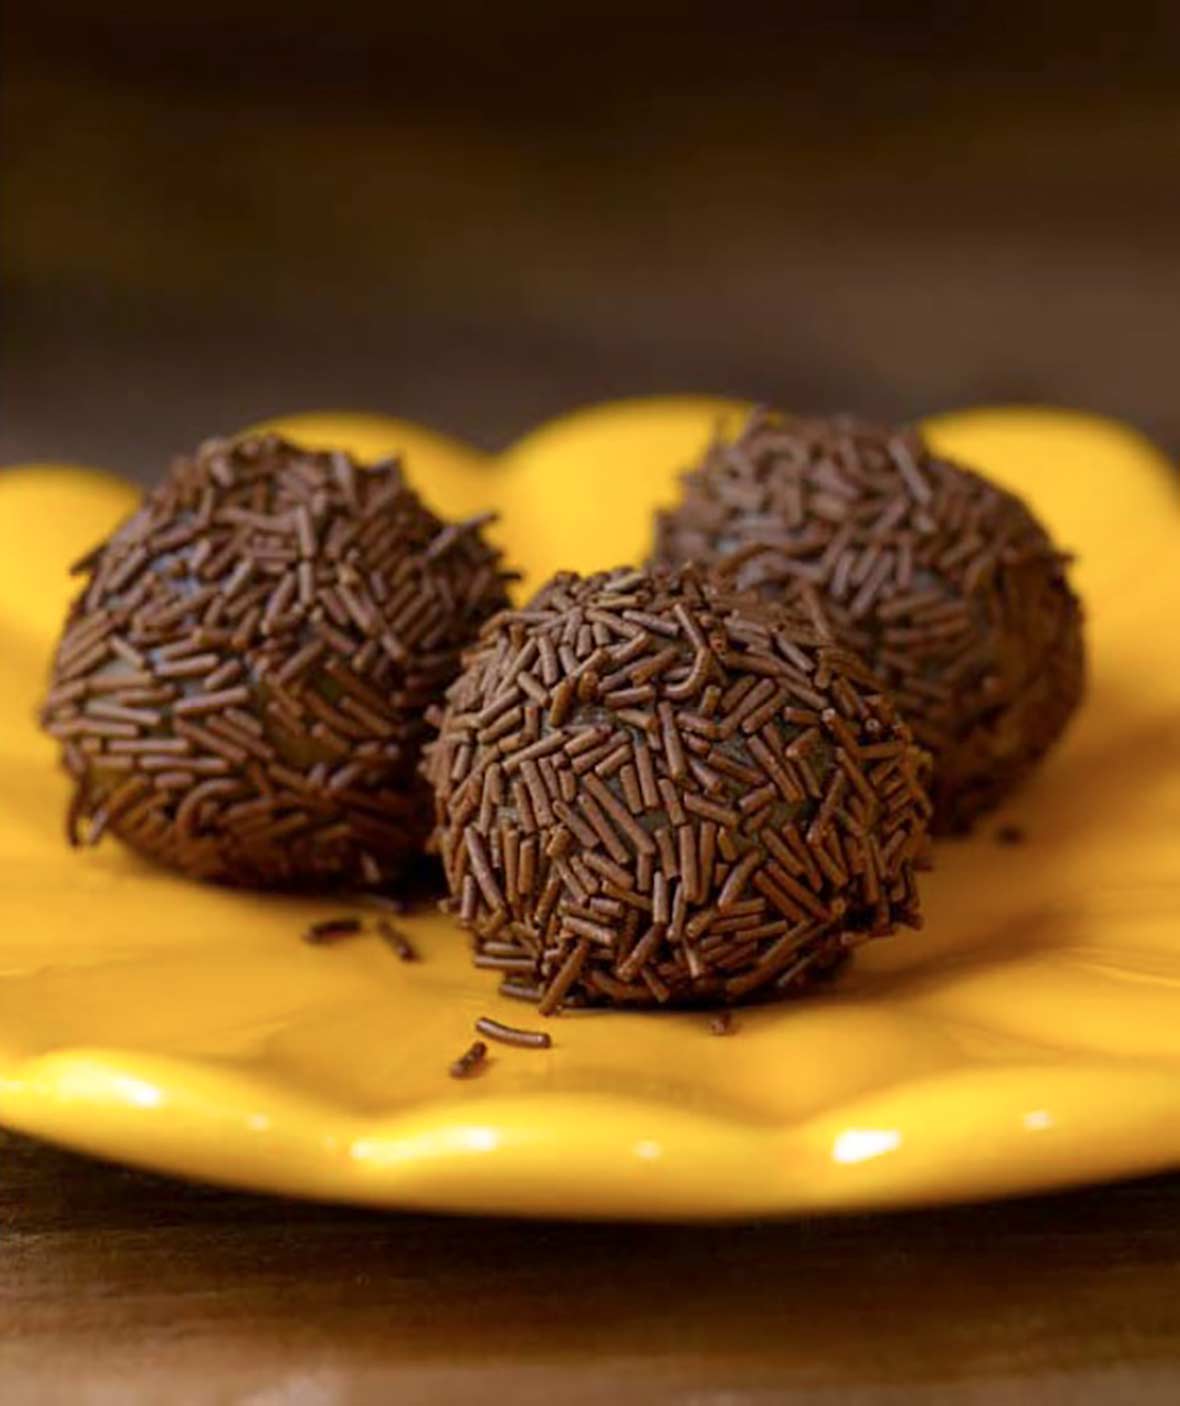 Three golf-ball size chocolate Brazilian candies covered with chocolate sprinkles on a yellow plate.